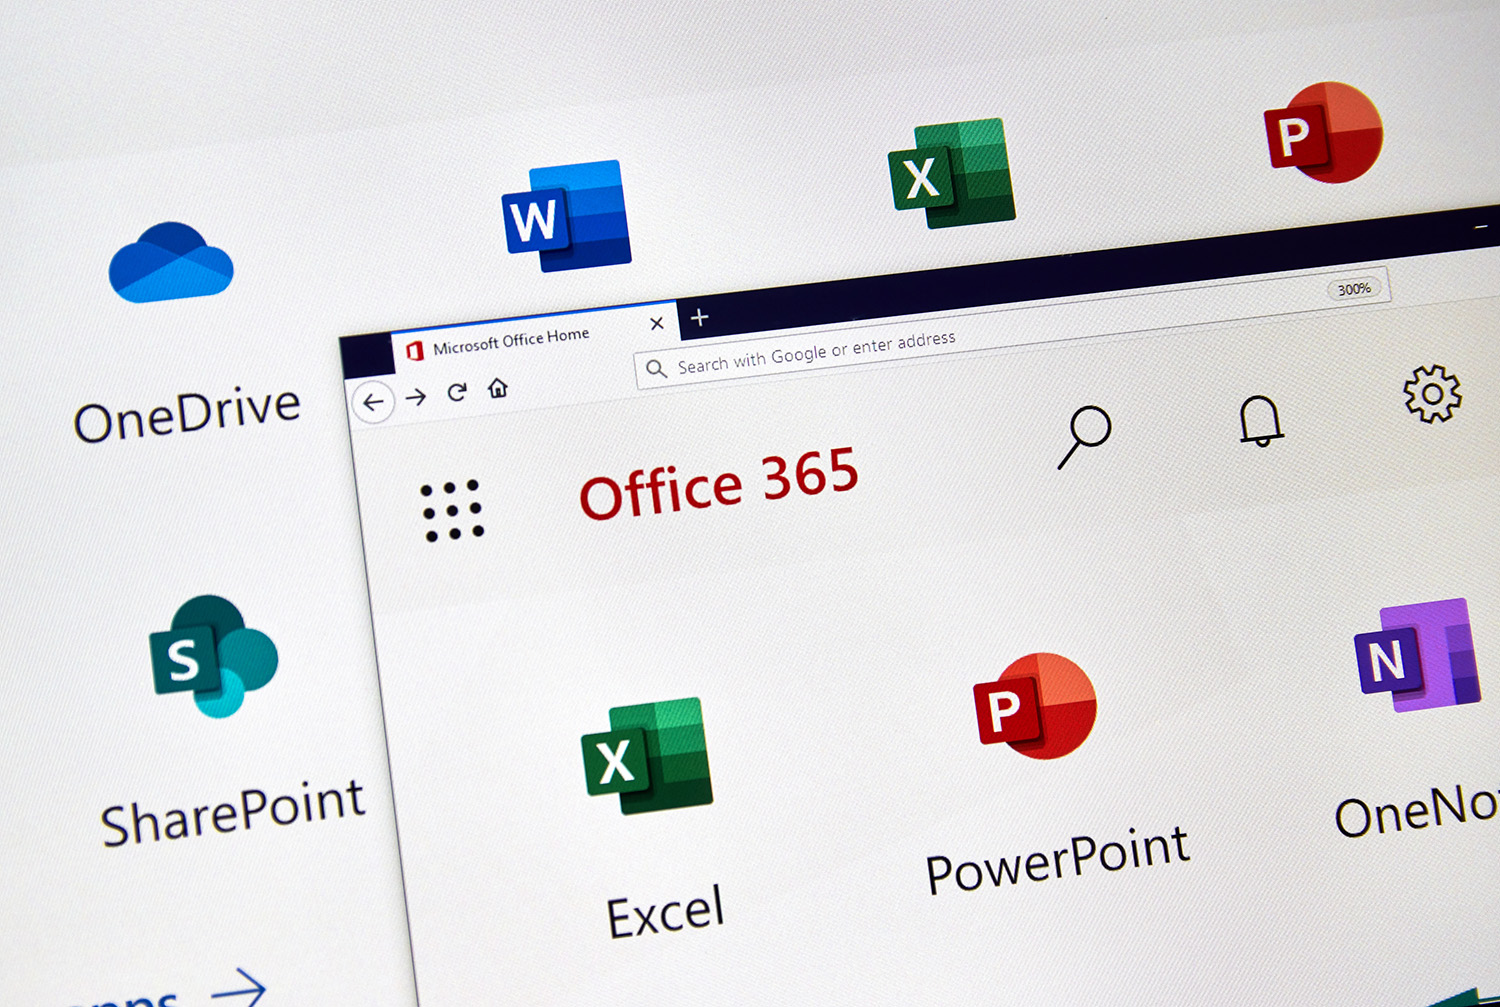 Microsofrt Office 365 new icons on a PC screen. Office 365 is the brand name Microsoft uses for a group of subscriptions that provide productivity software